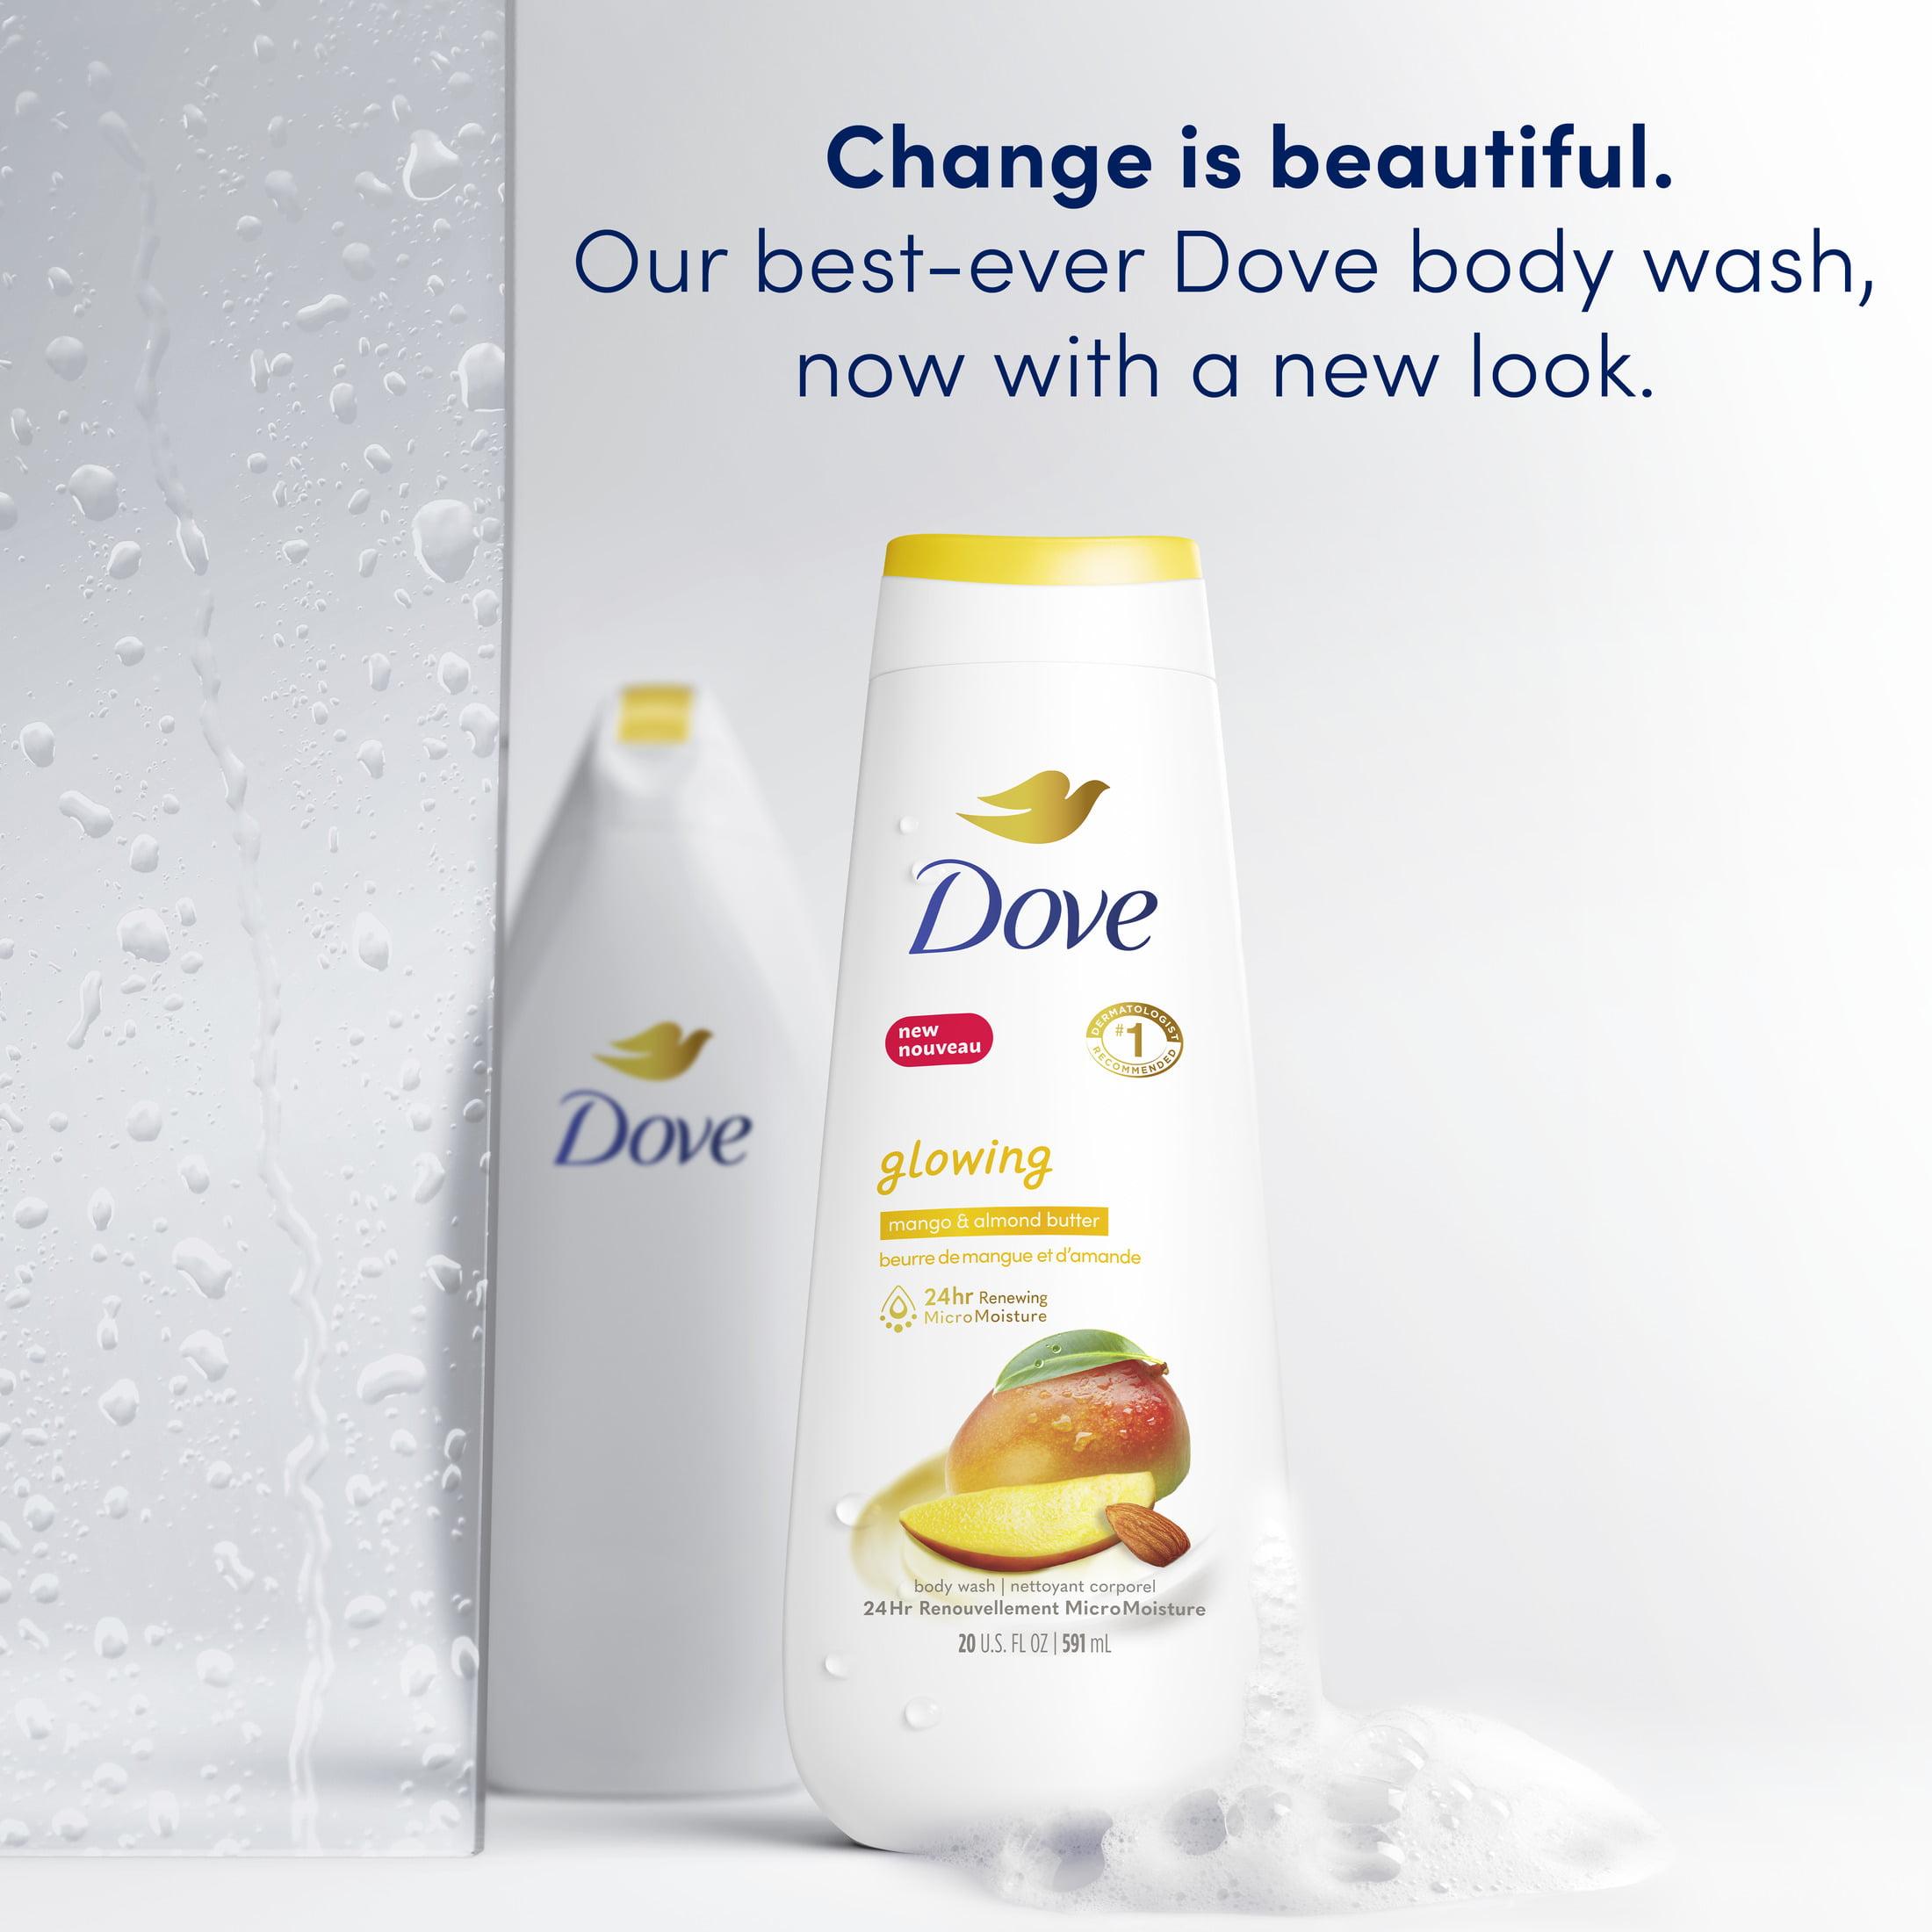 Dove Glowing Long Lasting Gentle Women's Body Wash All Skin Type, Mango and Almond Butter, 20 fl oz - image 5 of 11